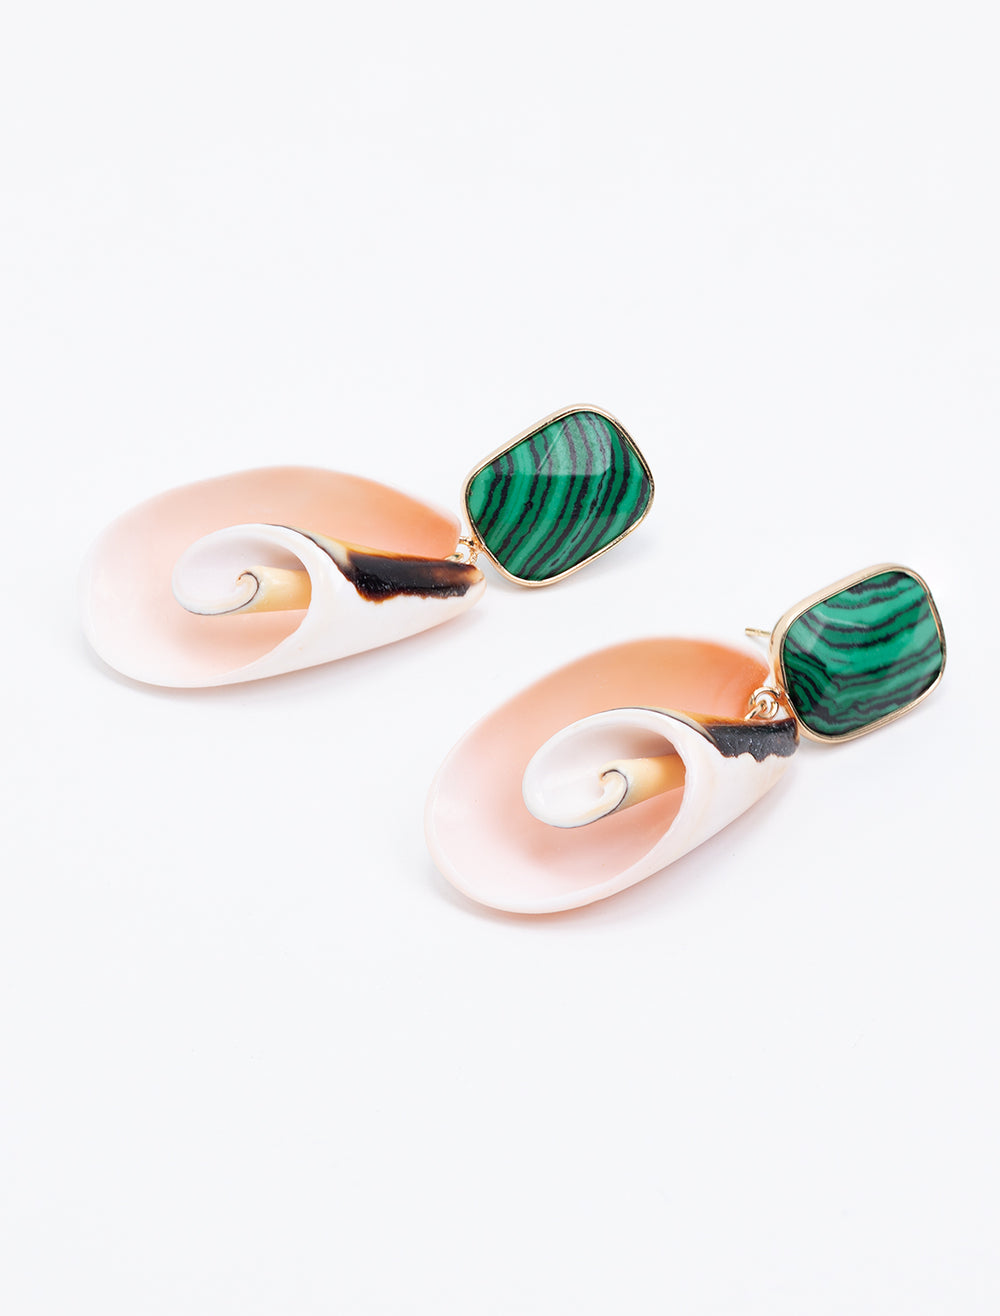 Laydown of St. Armands' malachite and pink shell earrings.